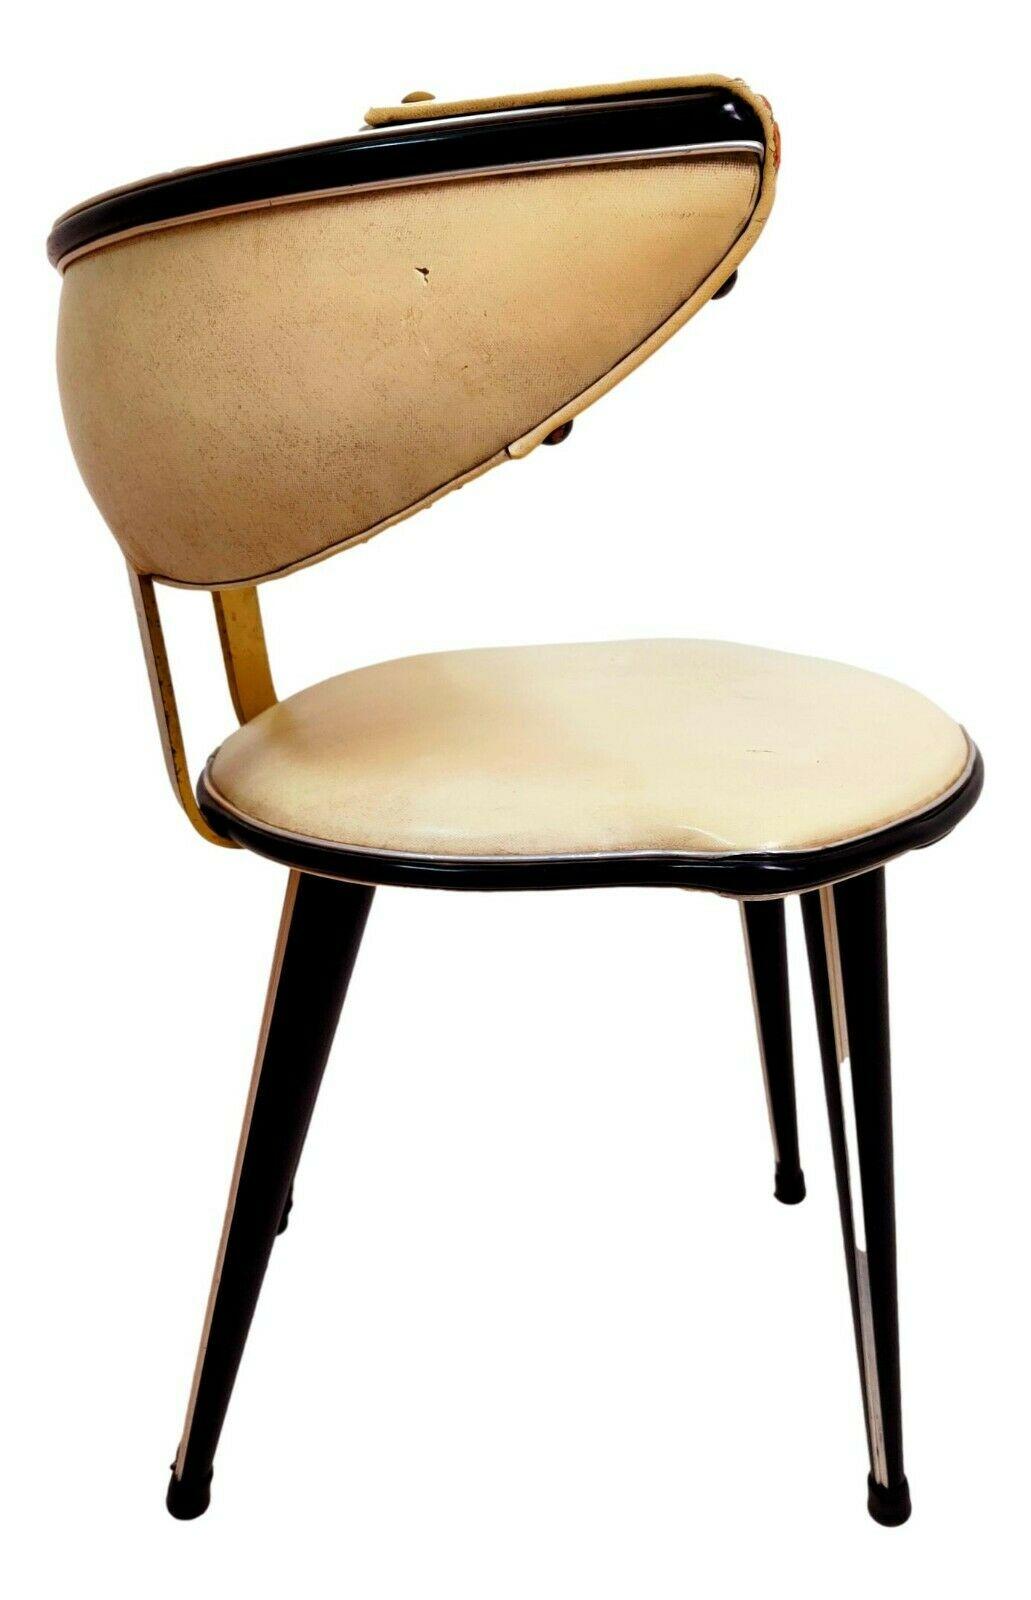 Mid-20th Century Collectible Armchair Design Umberto Mascagni, 1960s For Sale